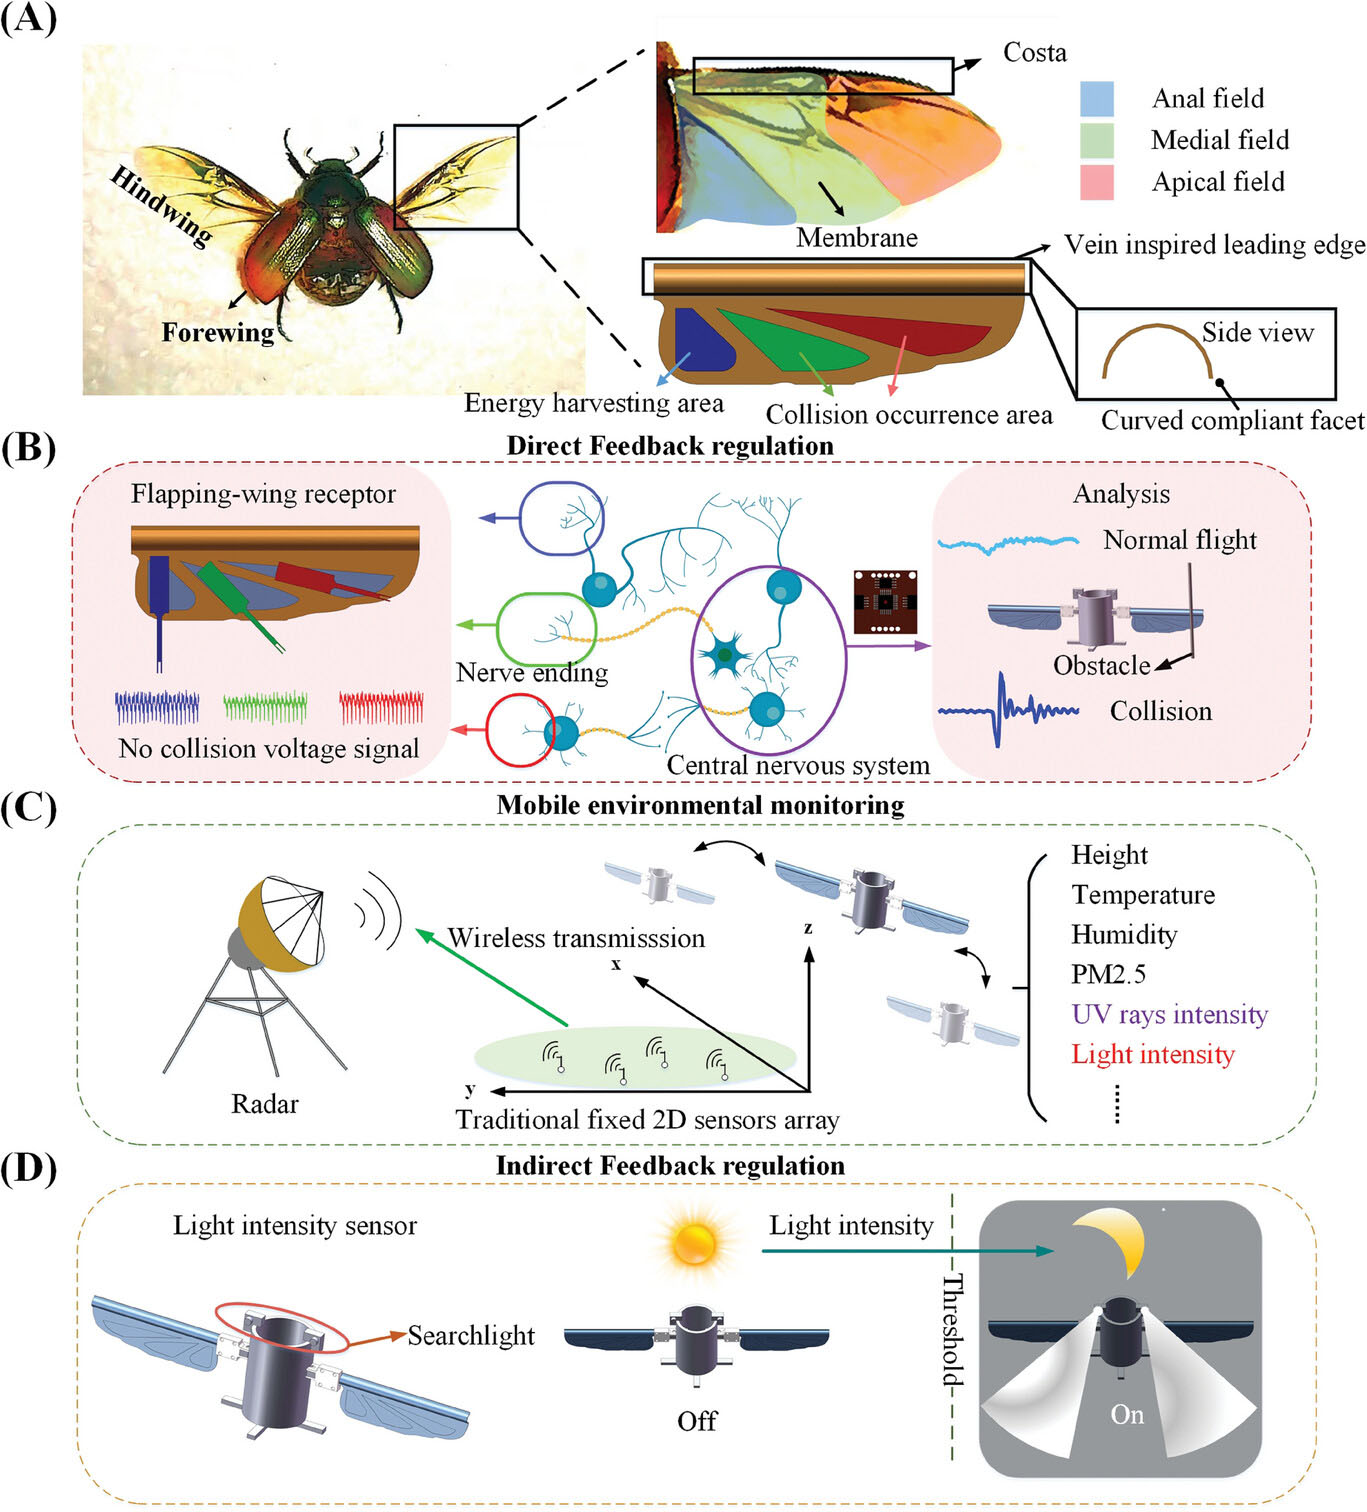 Biomimetic designs of the flapping wing and potential applications